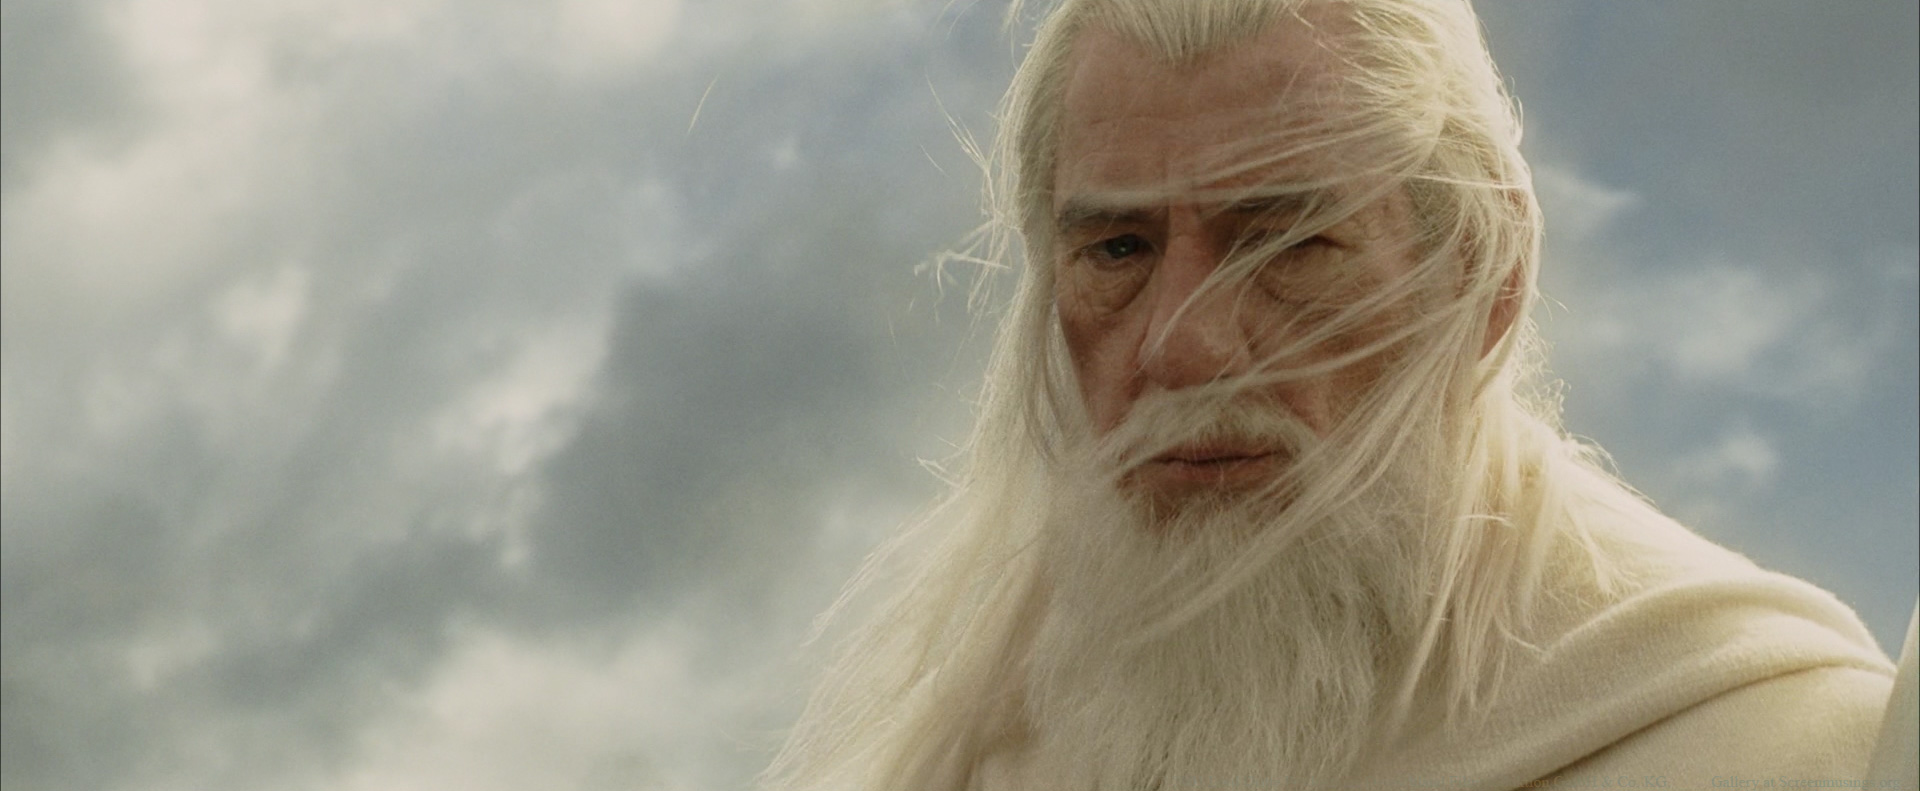 Ian McKellen, Gandalf in The Lord of the Rings: The Return of the King